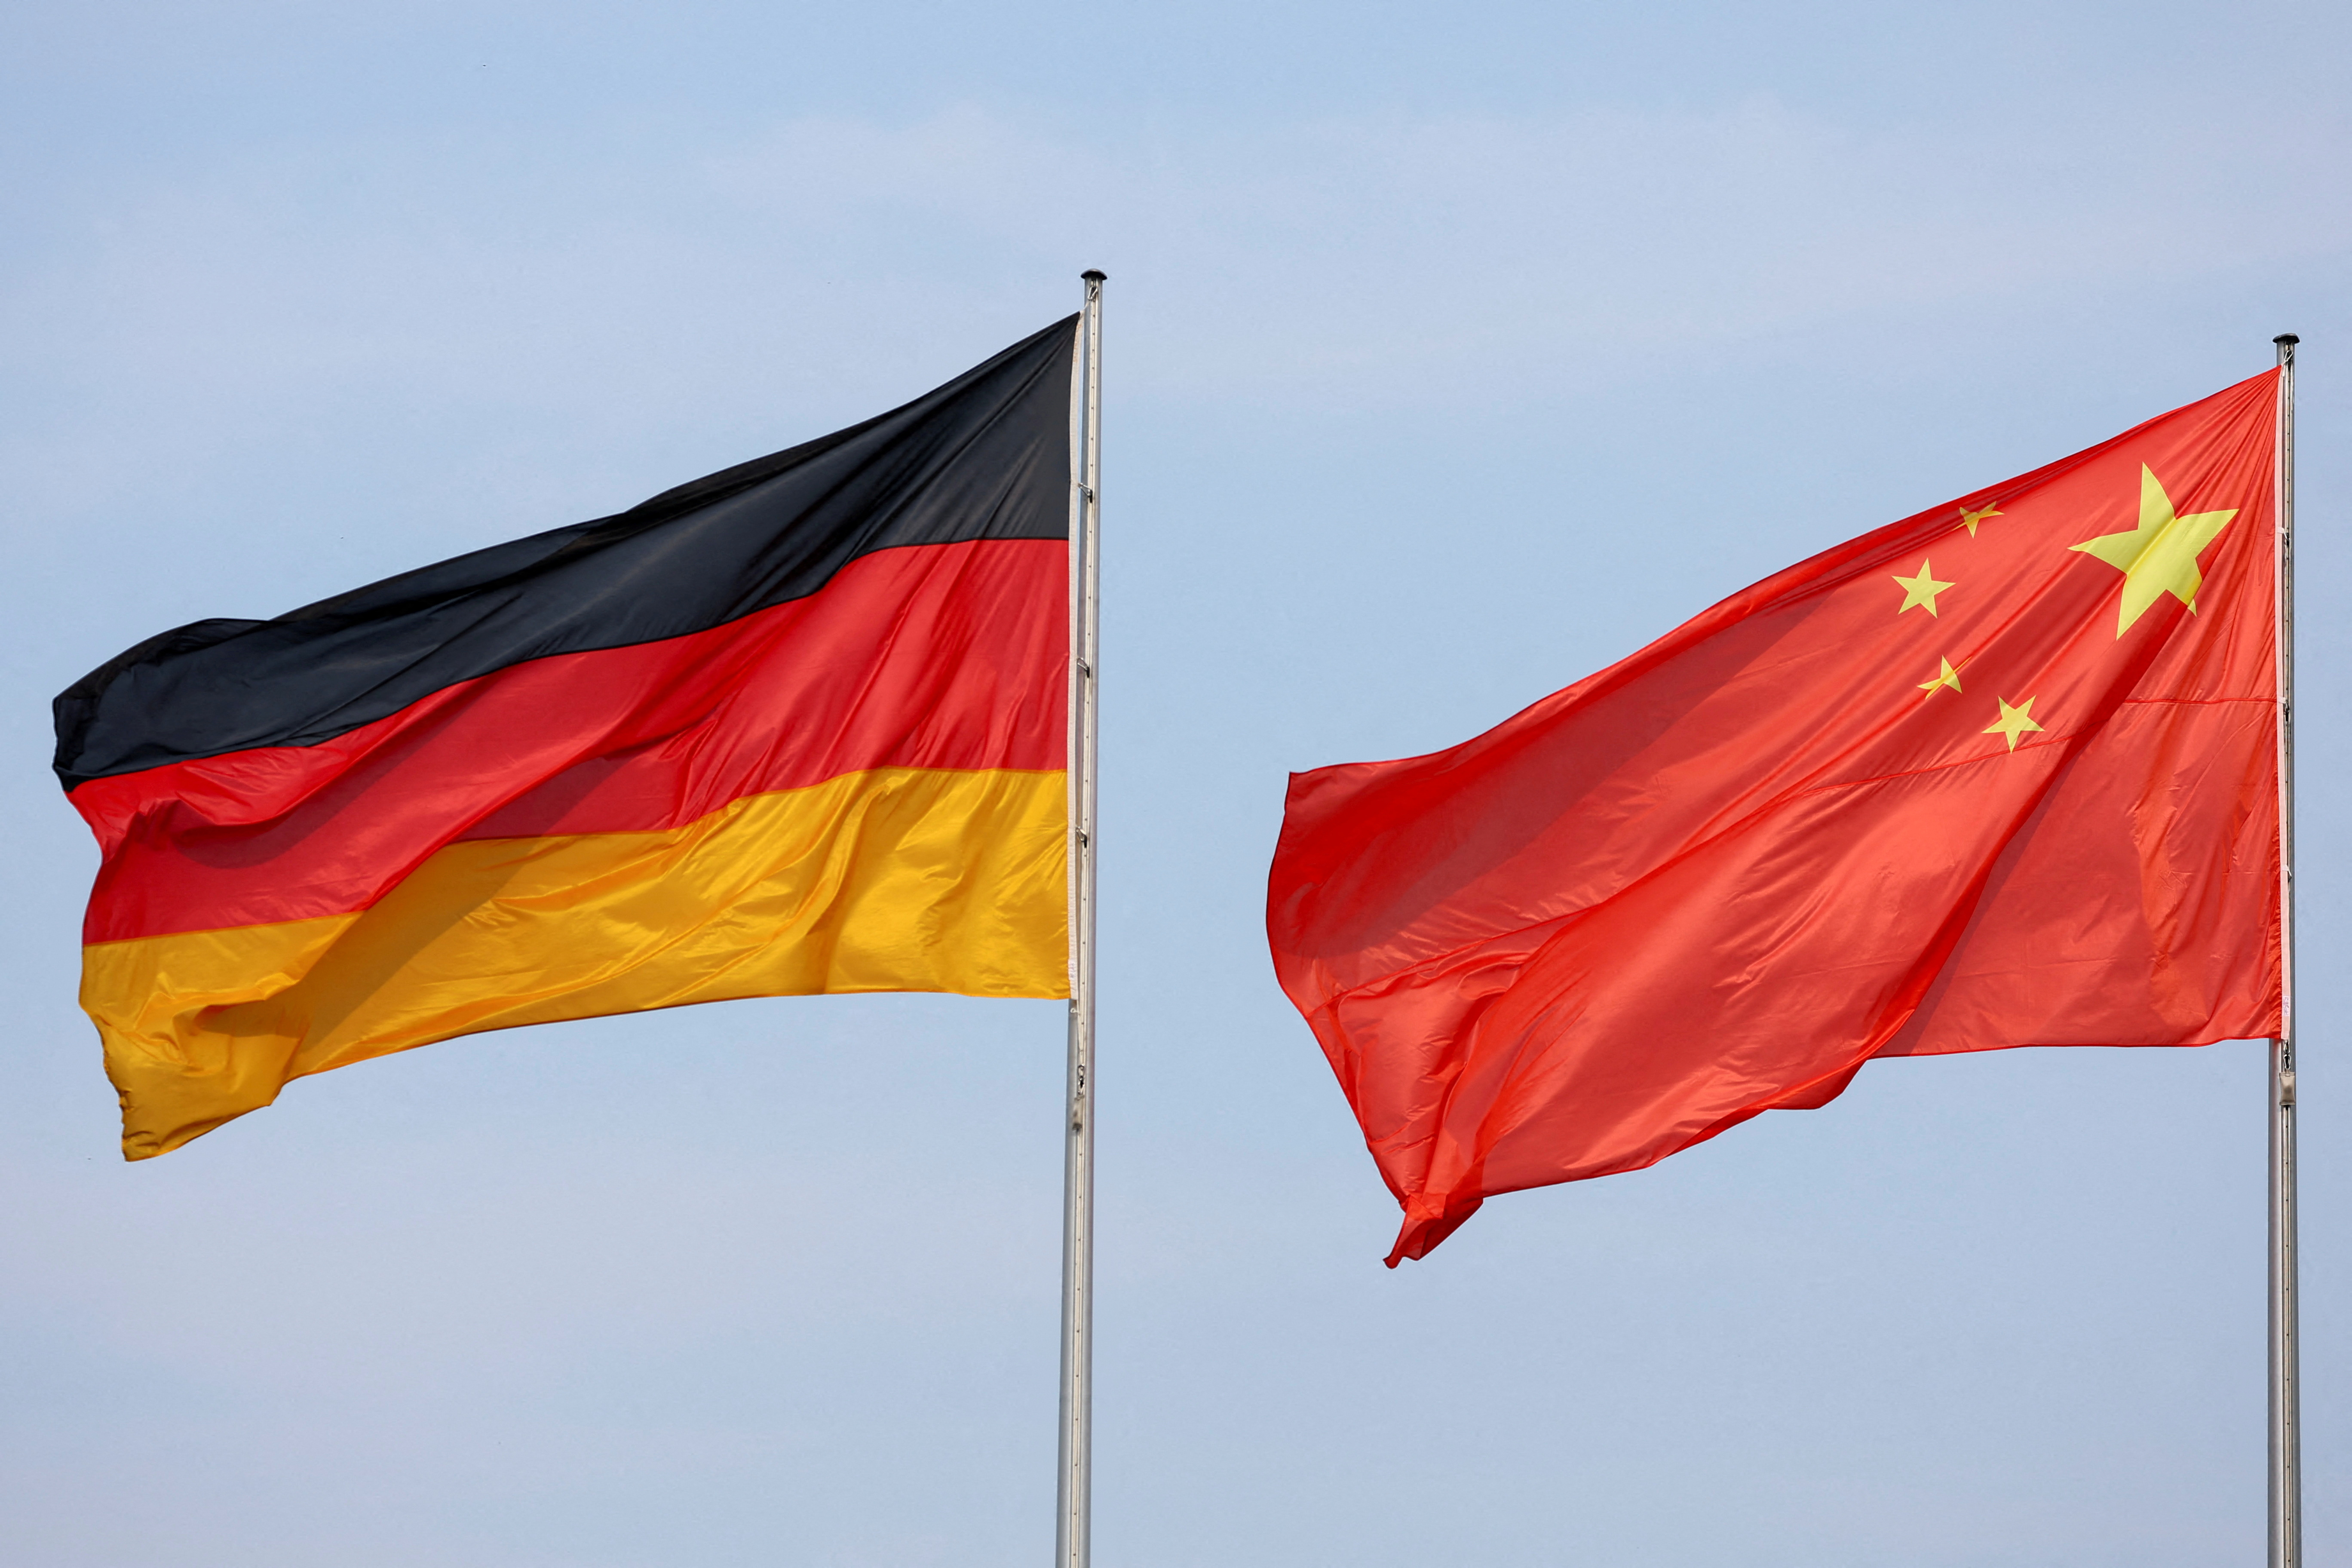 co\FILE PHOTO: The flags of Germany and China are seen in Berlin, Germany